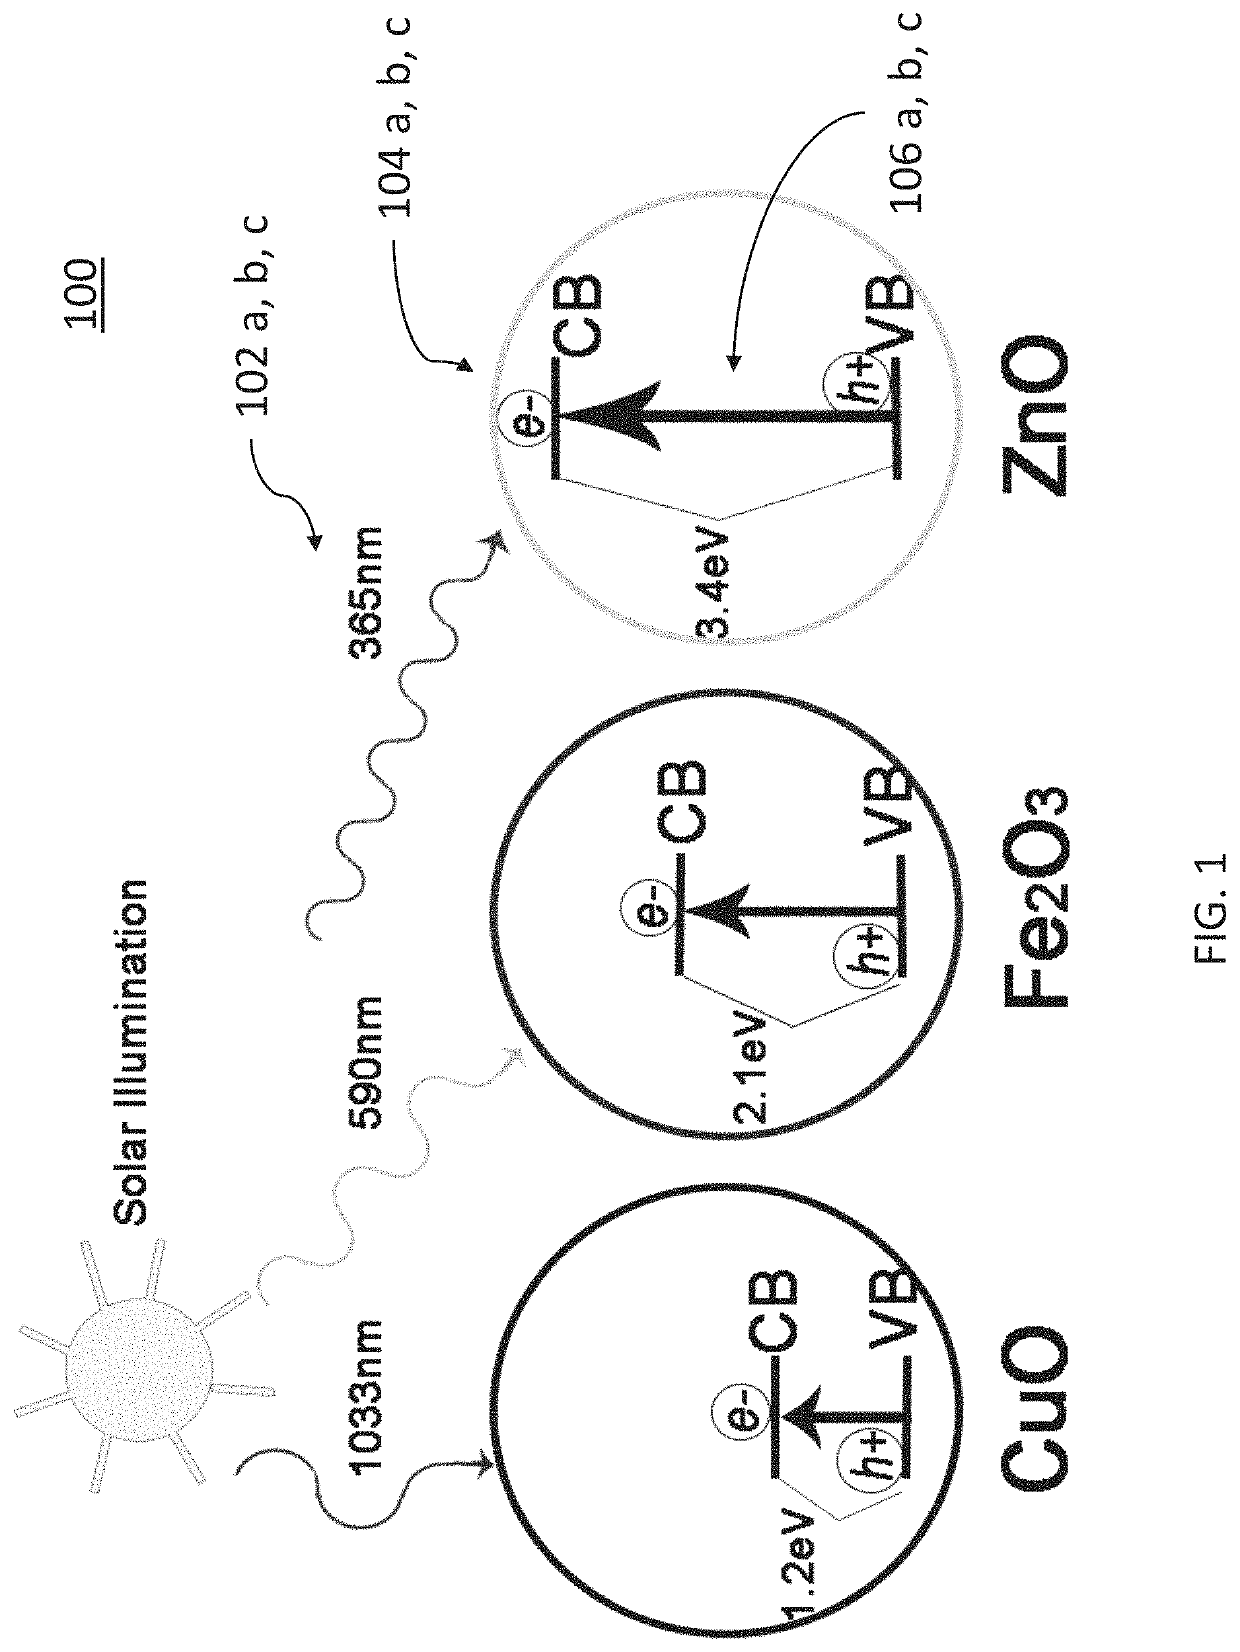 Multi-spectral photocatalytic compounds